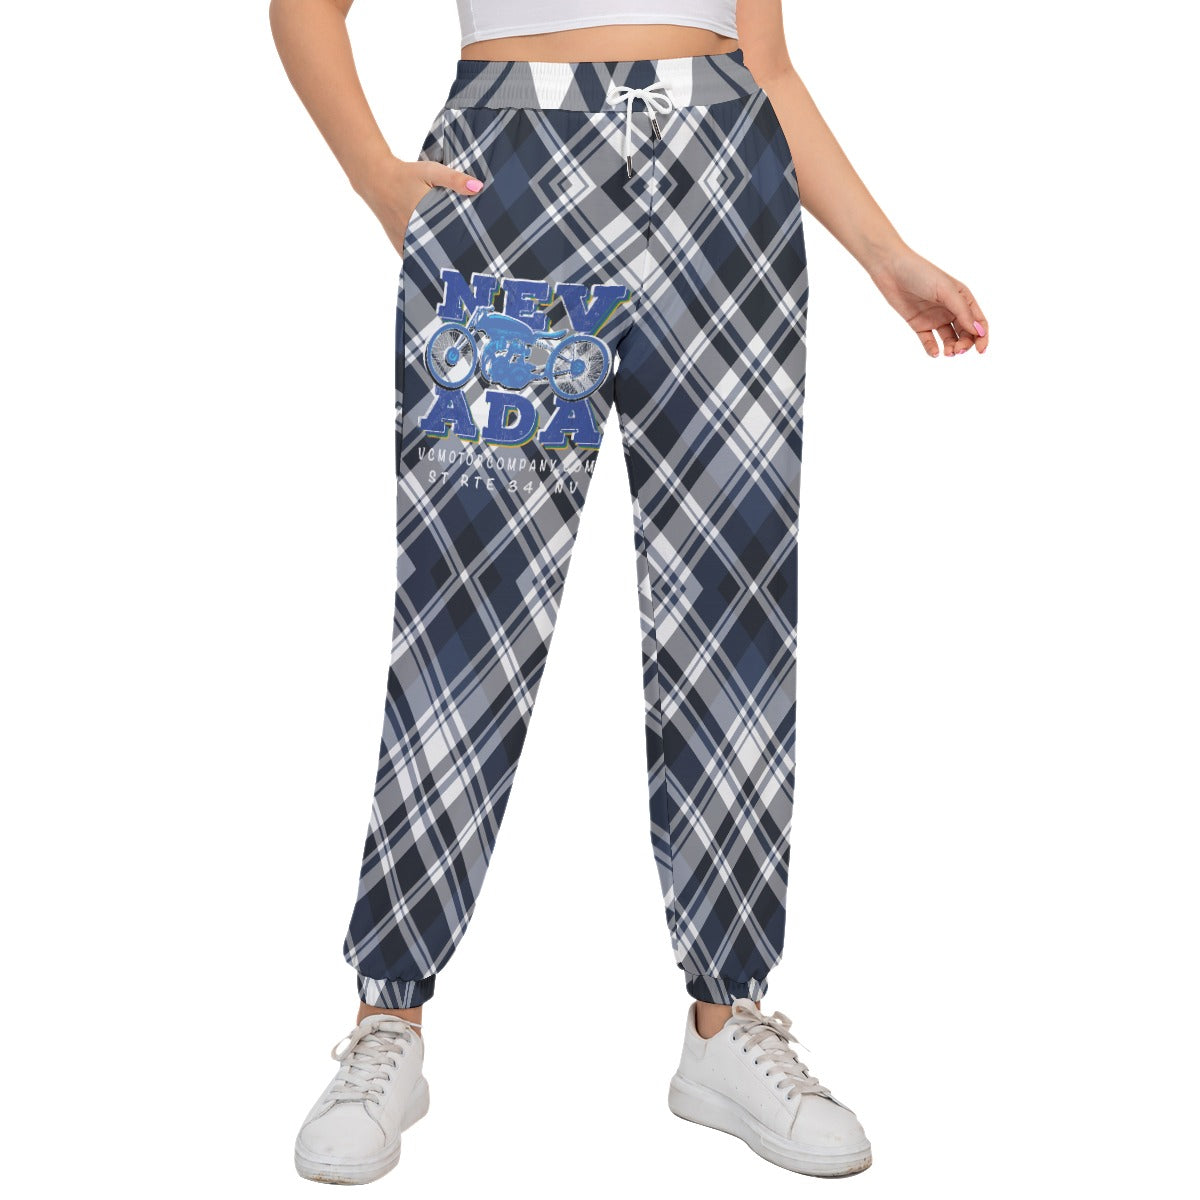 Nevada Blue and Grey Soft Terry Lounge Pant with Pocket and Drawstring  Virginia City Motorcycle Company Apparel 